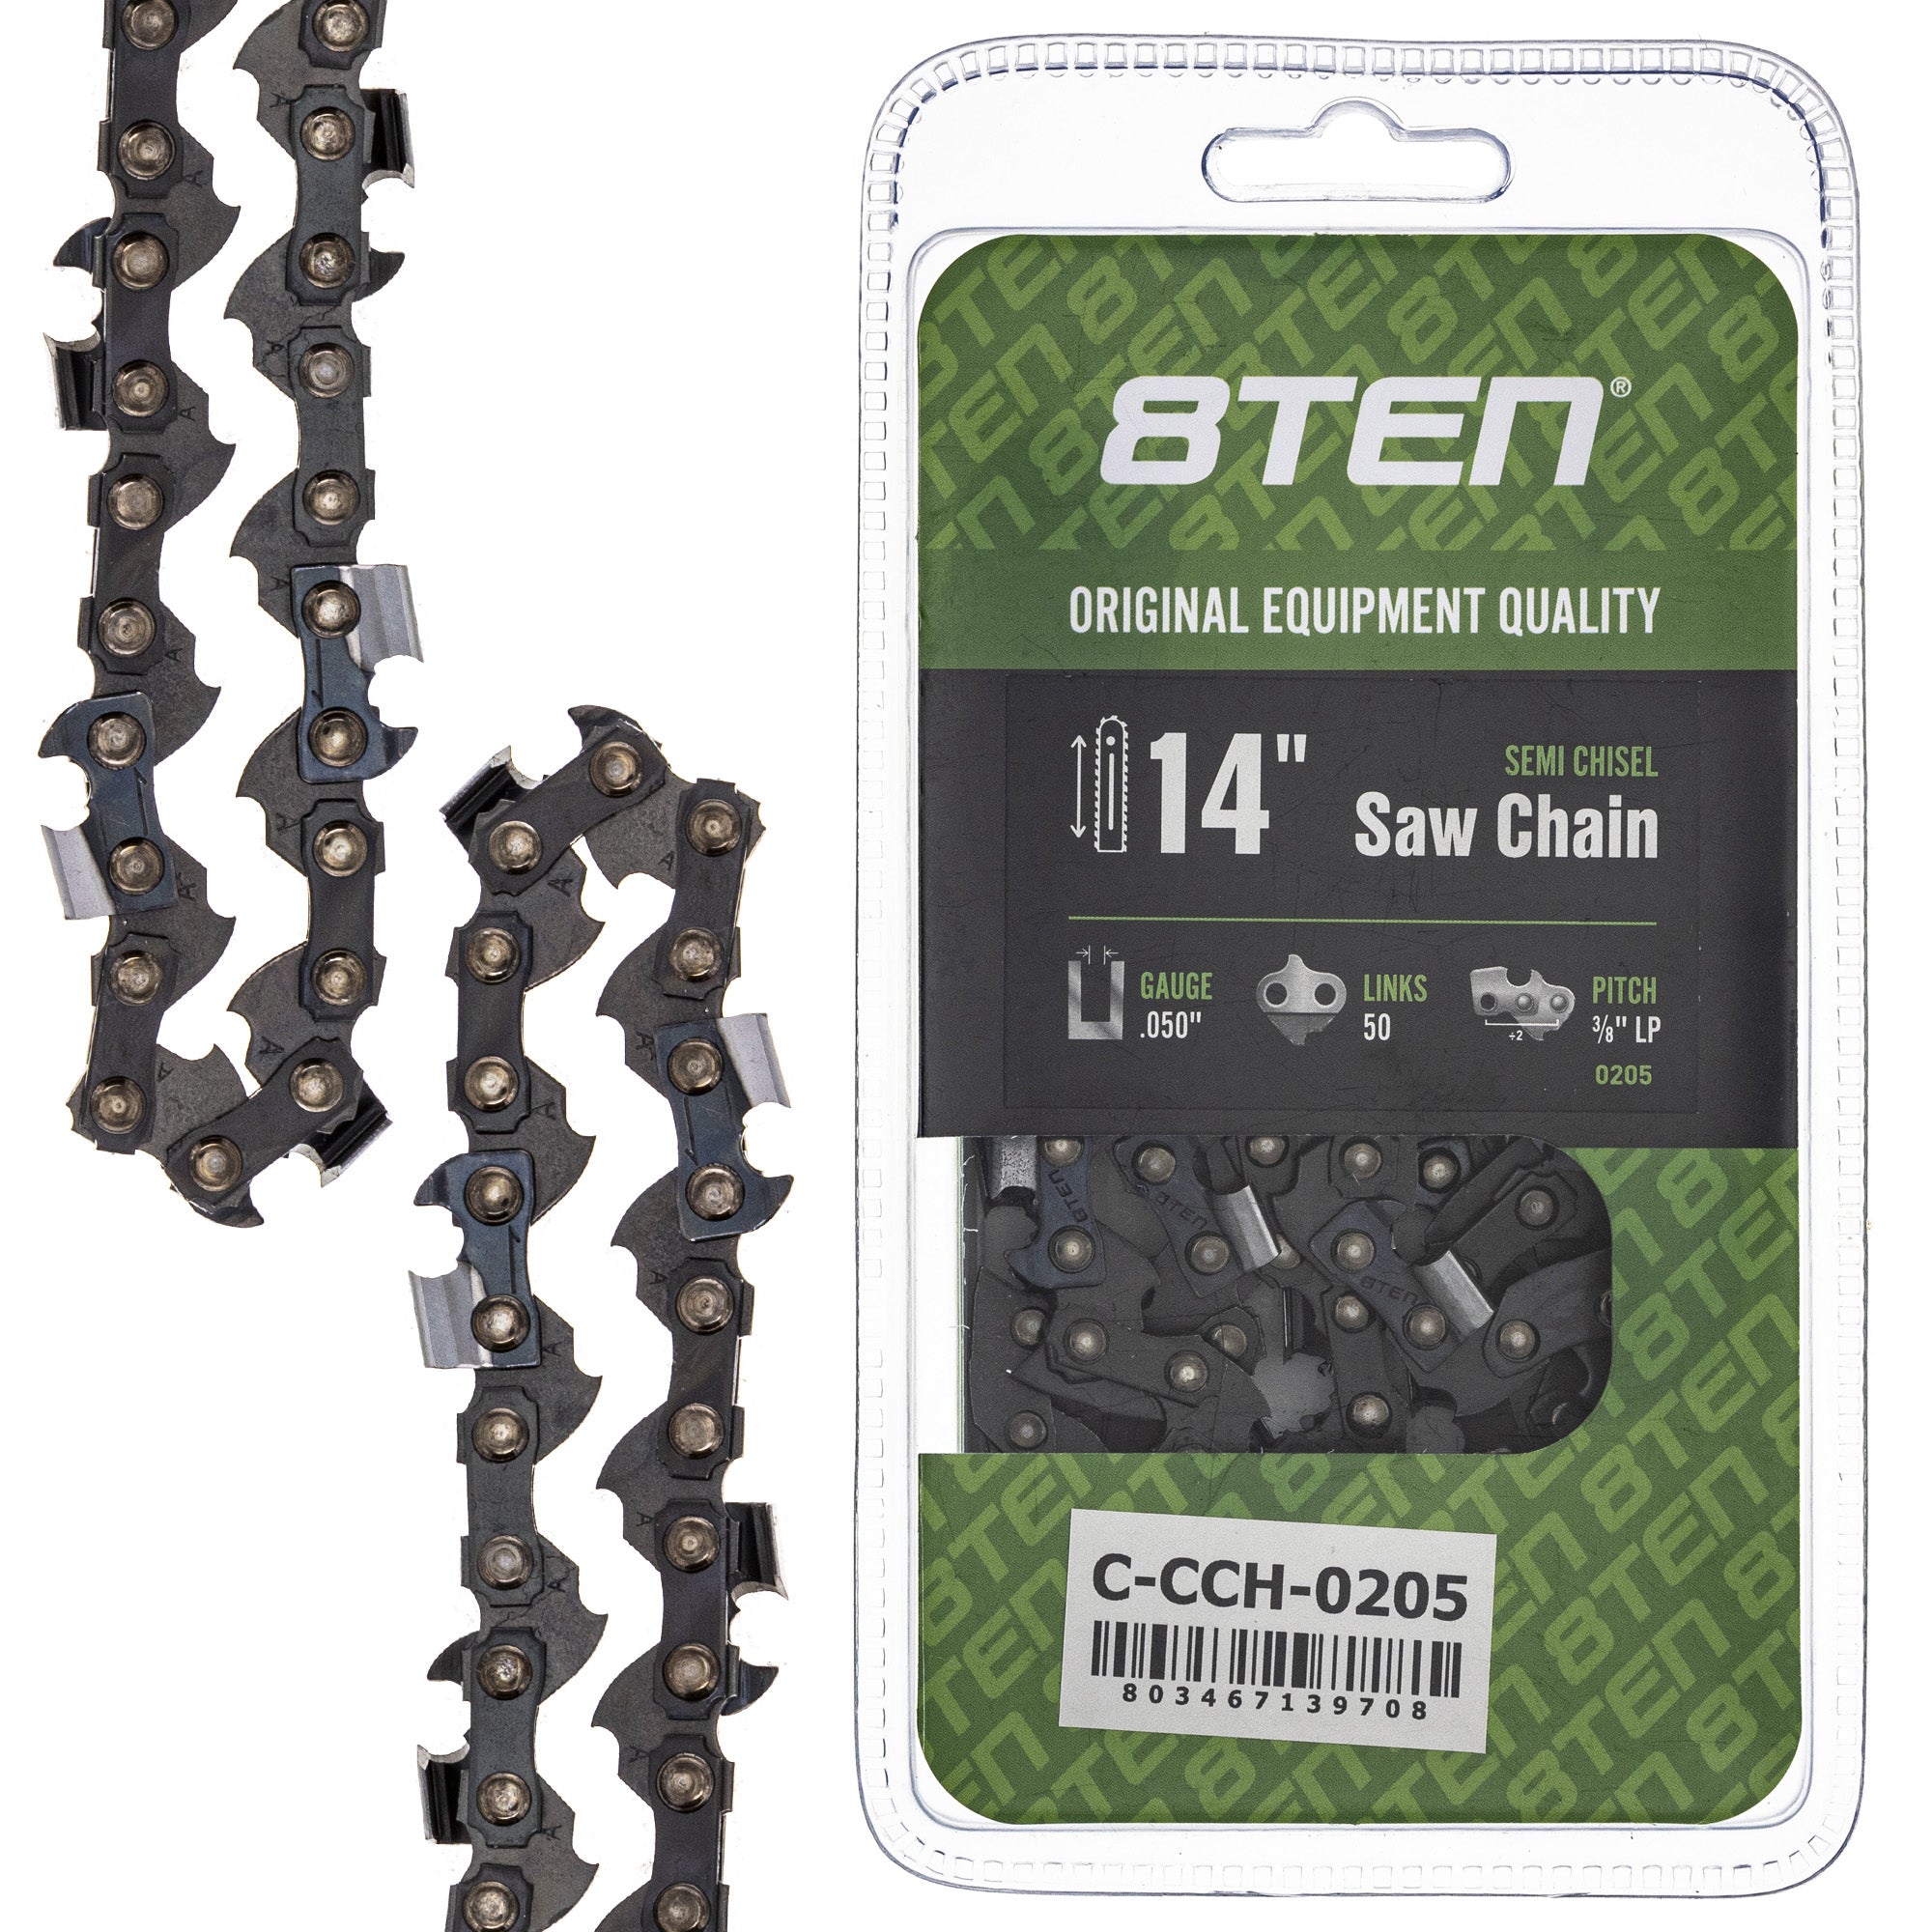 8TEN MK1010345 Guide Bar & Chain for OLE MSE MS Mac